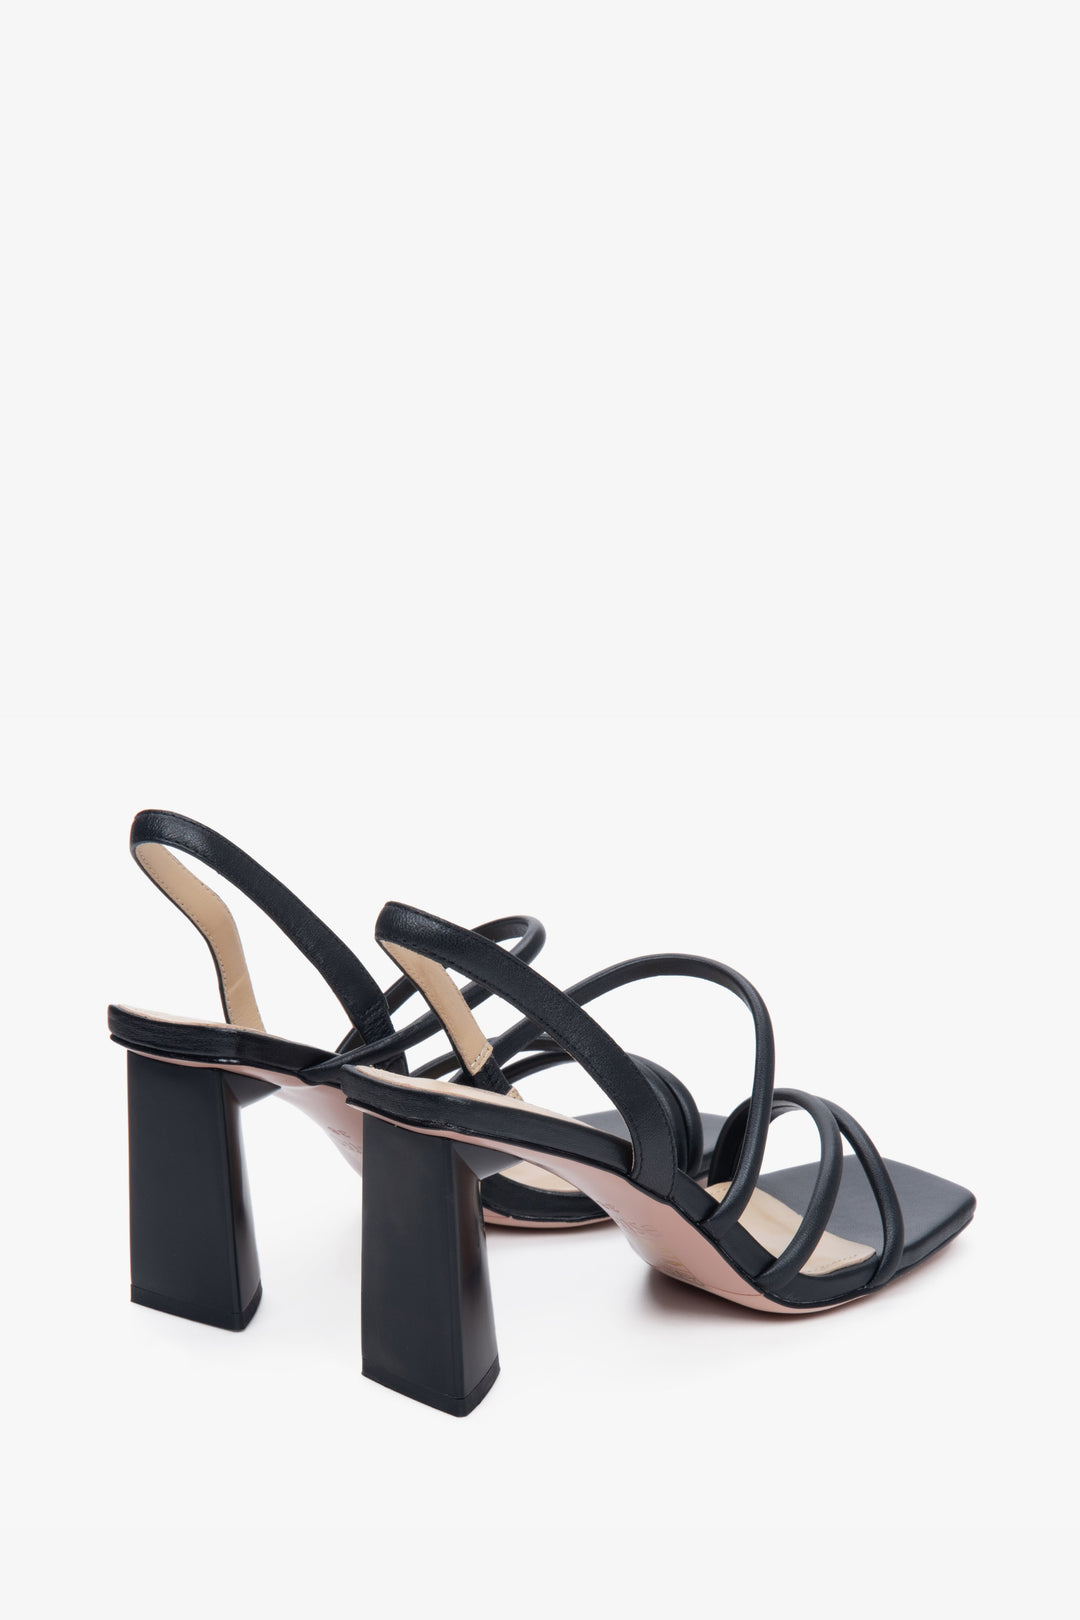 Black strappy women's leather sandals on a block heel - a close-up on the bottom line.